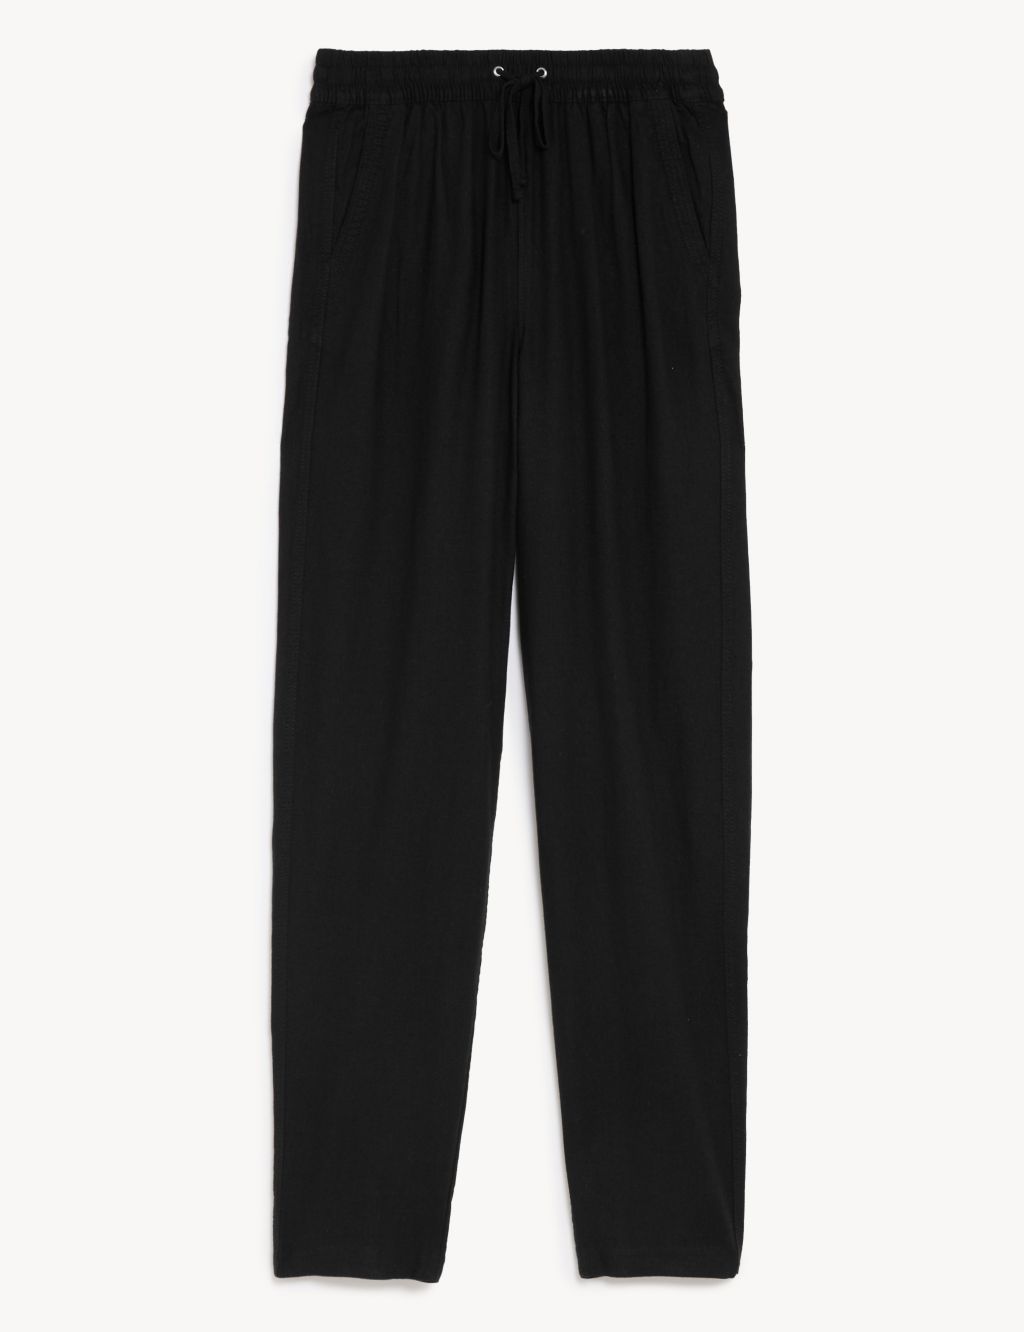 Linen Rich Tapered Trousers image 2